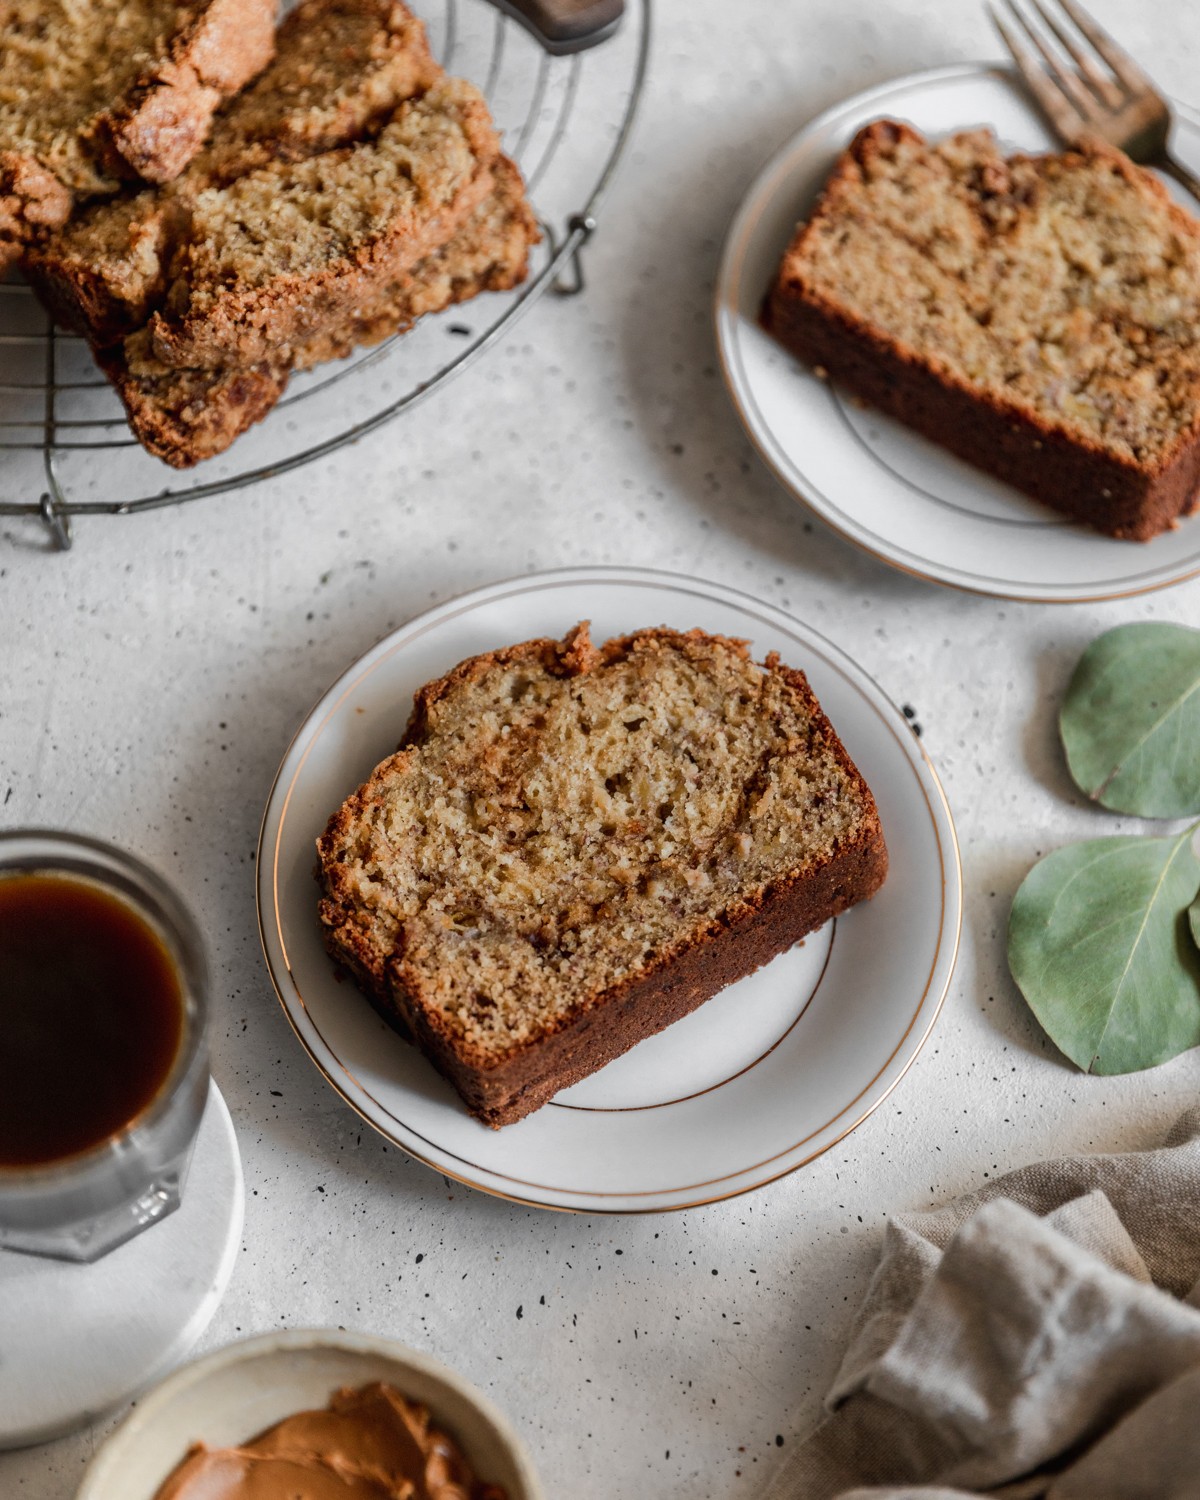 A side image of a slice of banana bread on a white plate placed on a white counter surrounded by cups of coffee, plates, a beige linen, and greenery.